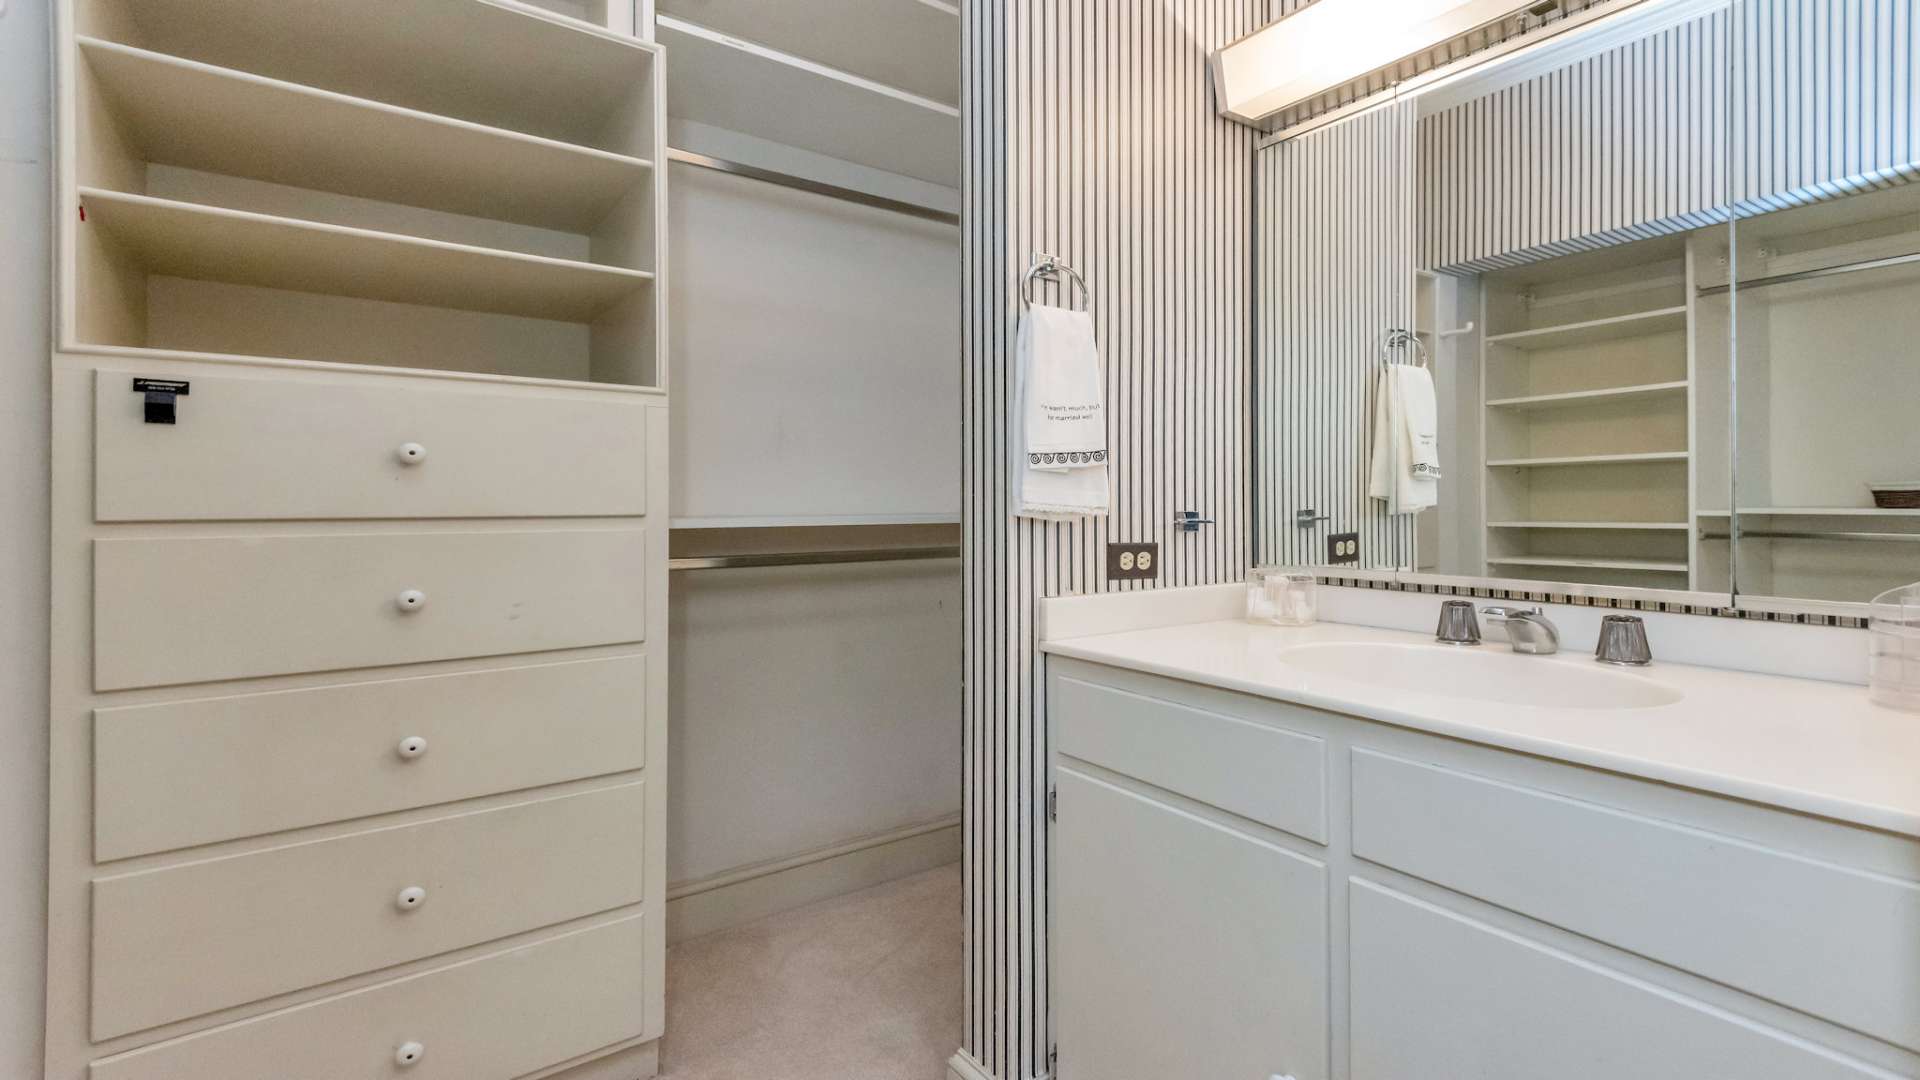 Walk-in closet dressing area with shaving sink.